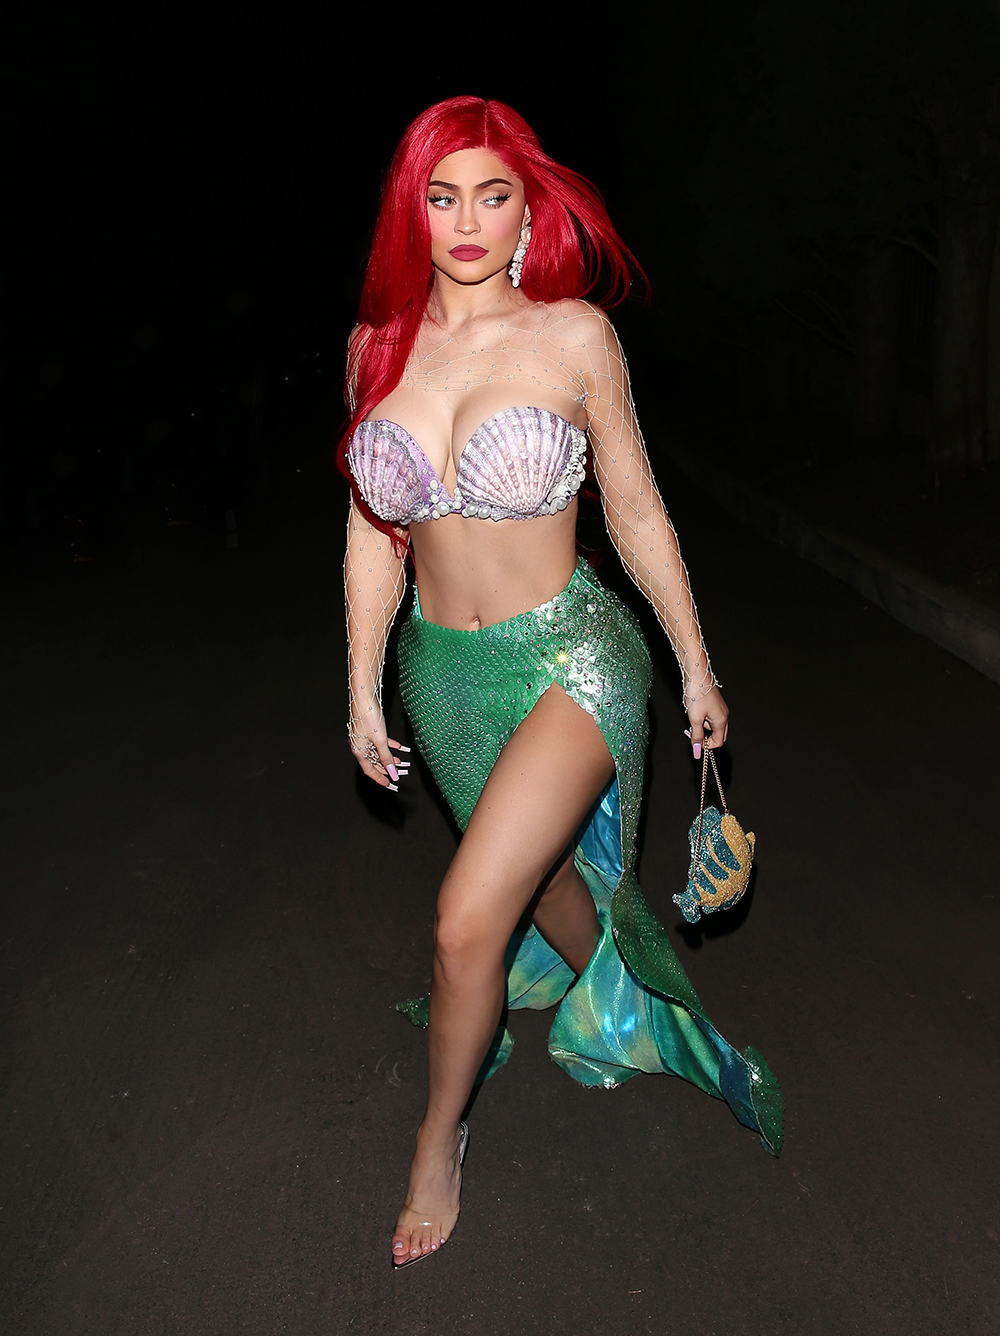 Hottest Celebrity Halloween Costumes See Photos image